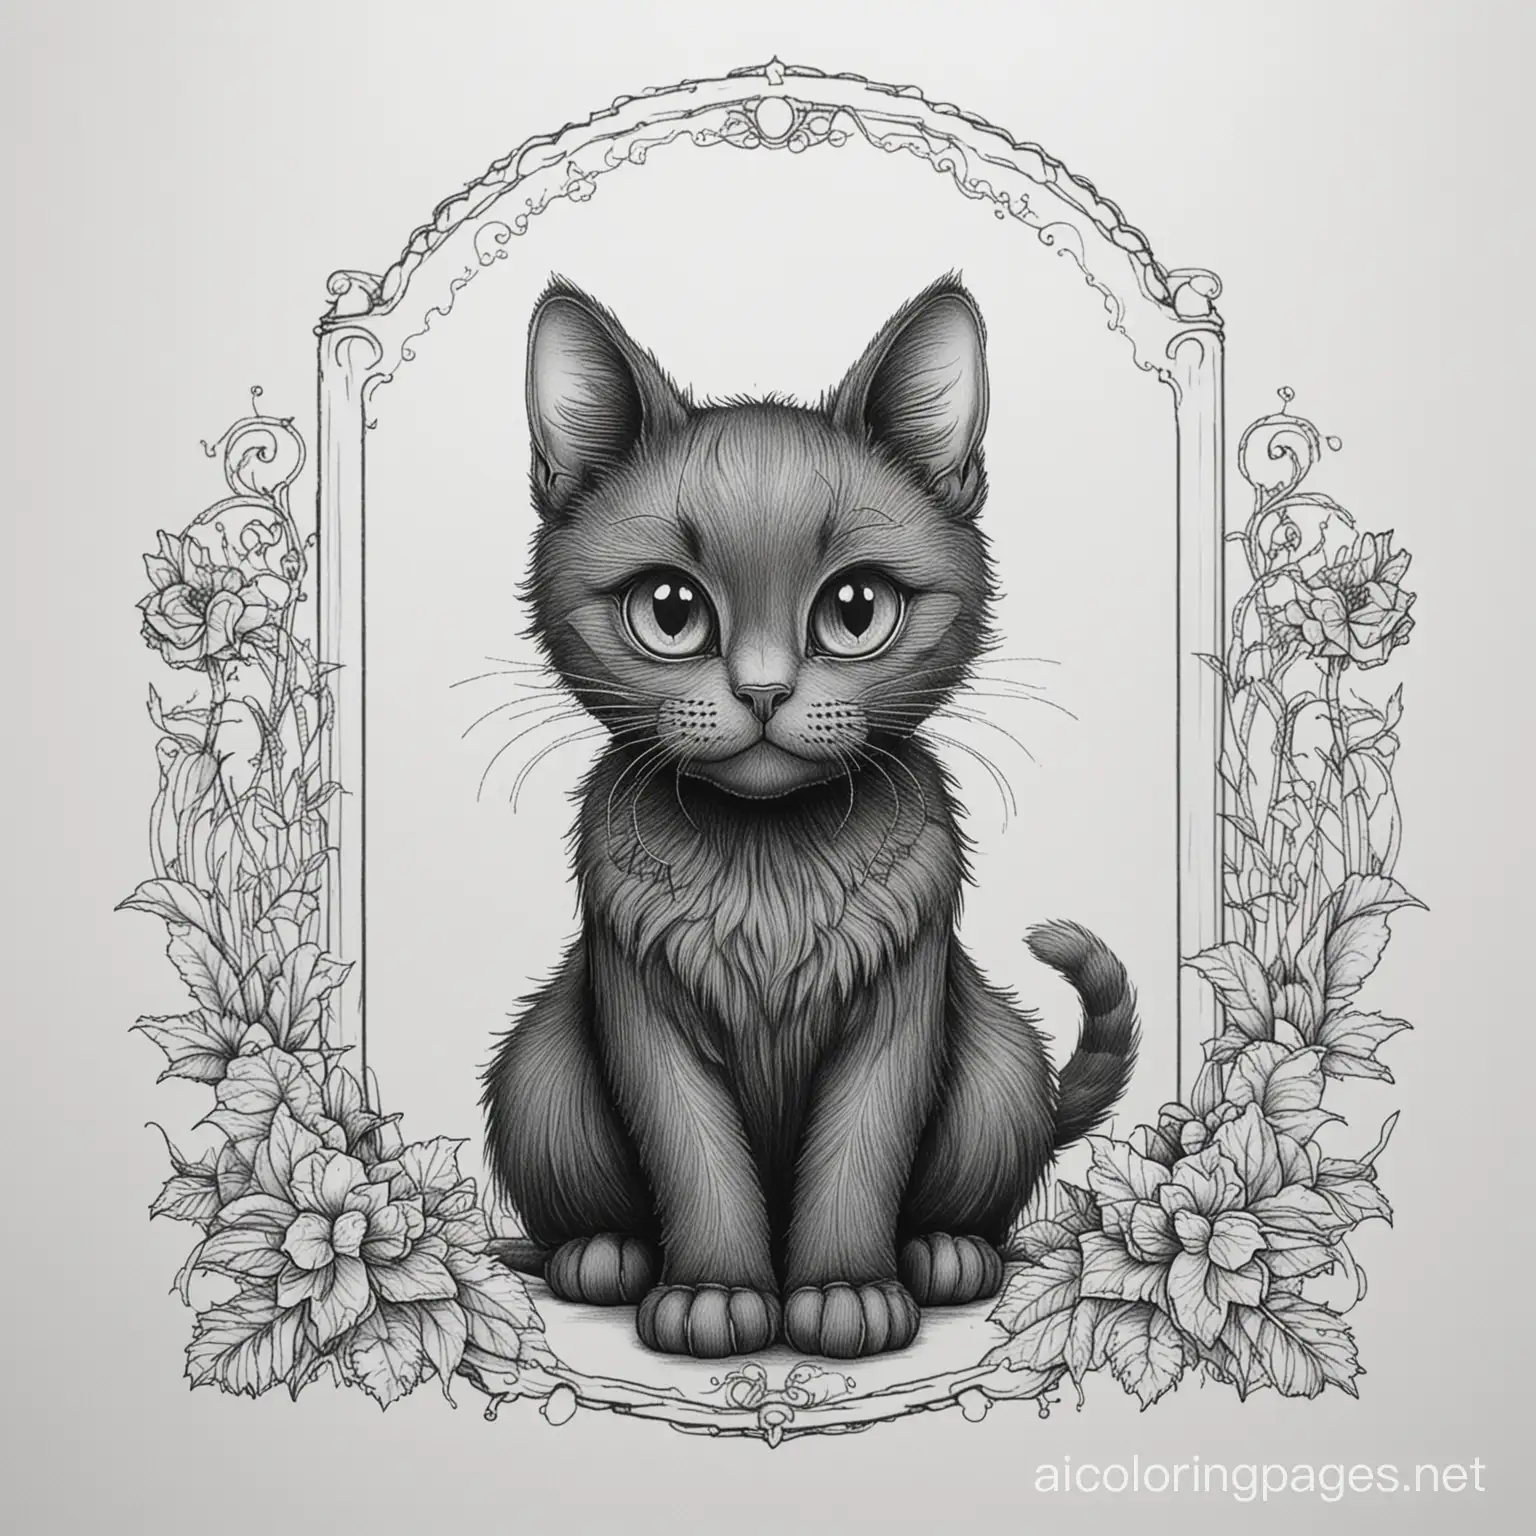 Gothic-Black-Cat-Coloring-Page-Simple-Line-Art-on-White-Background